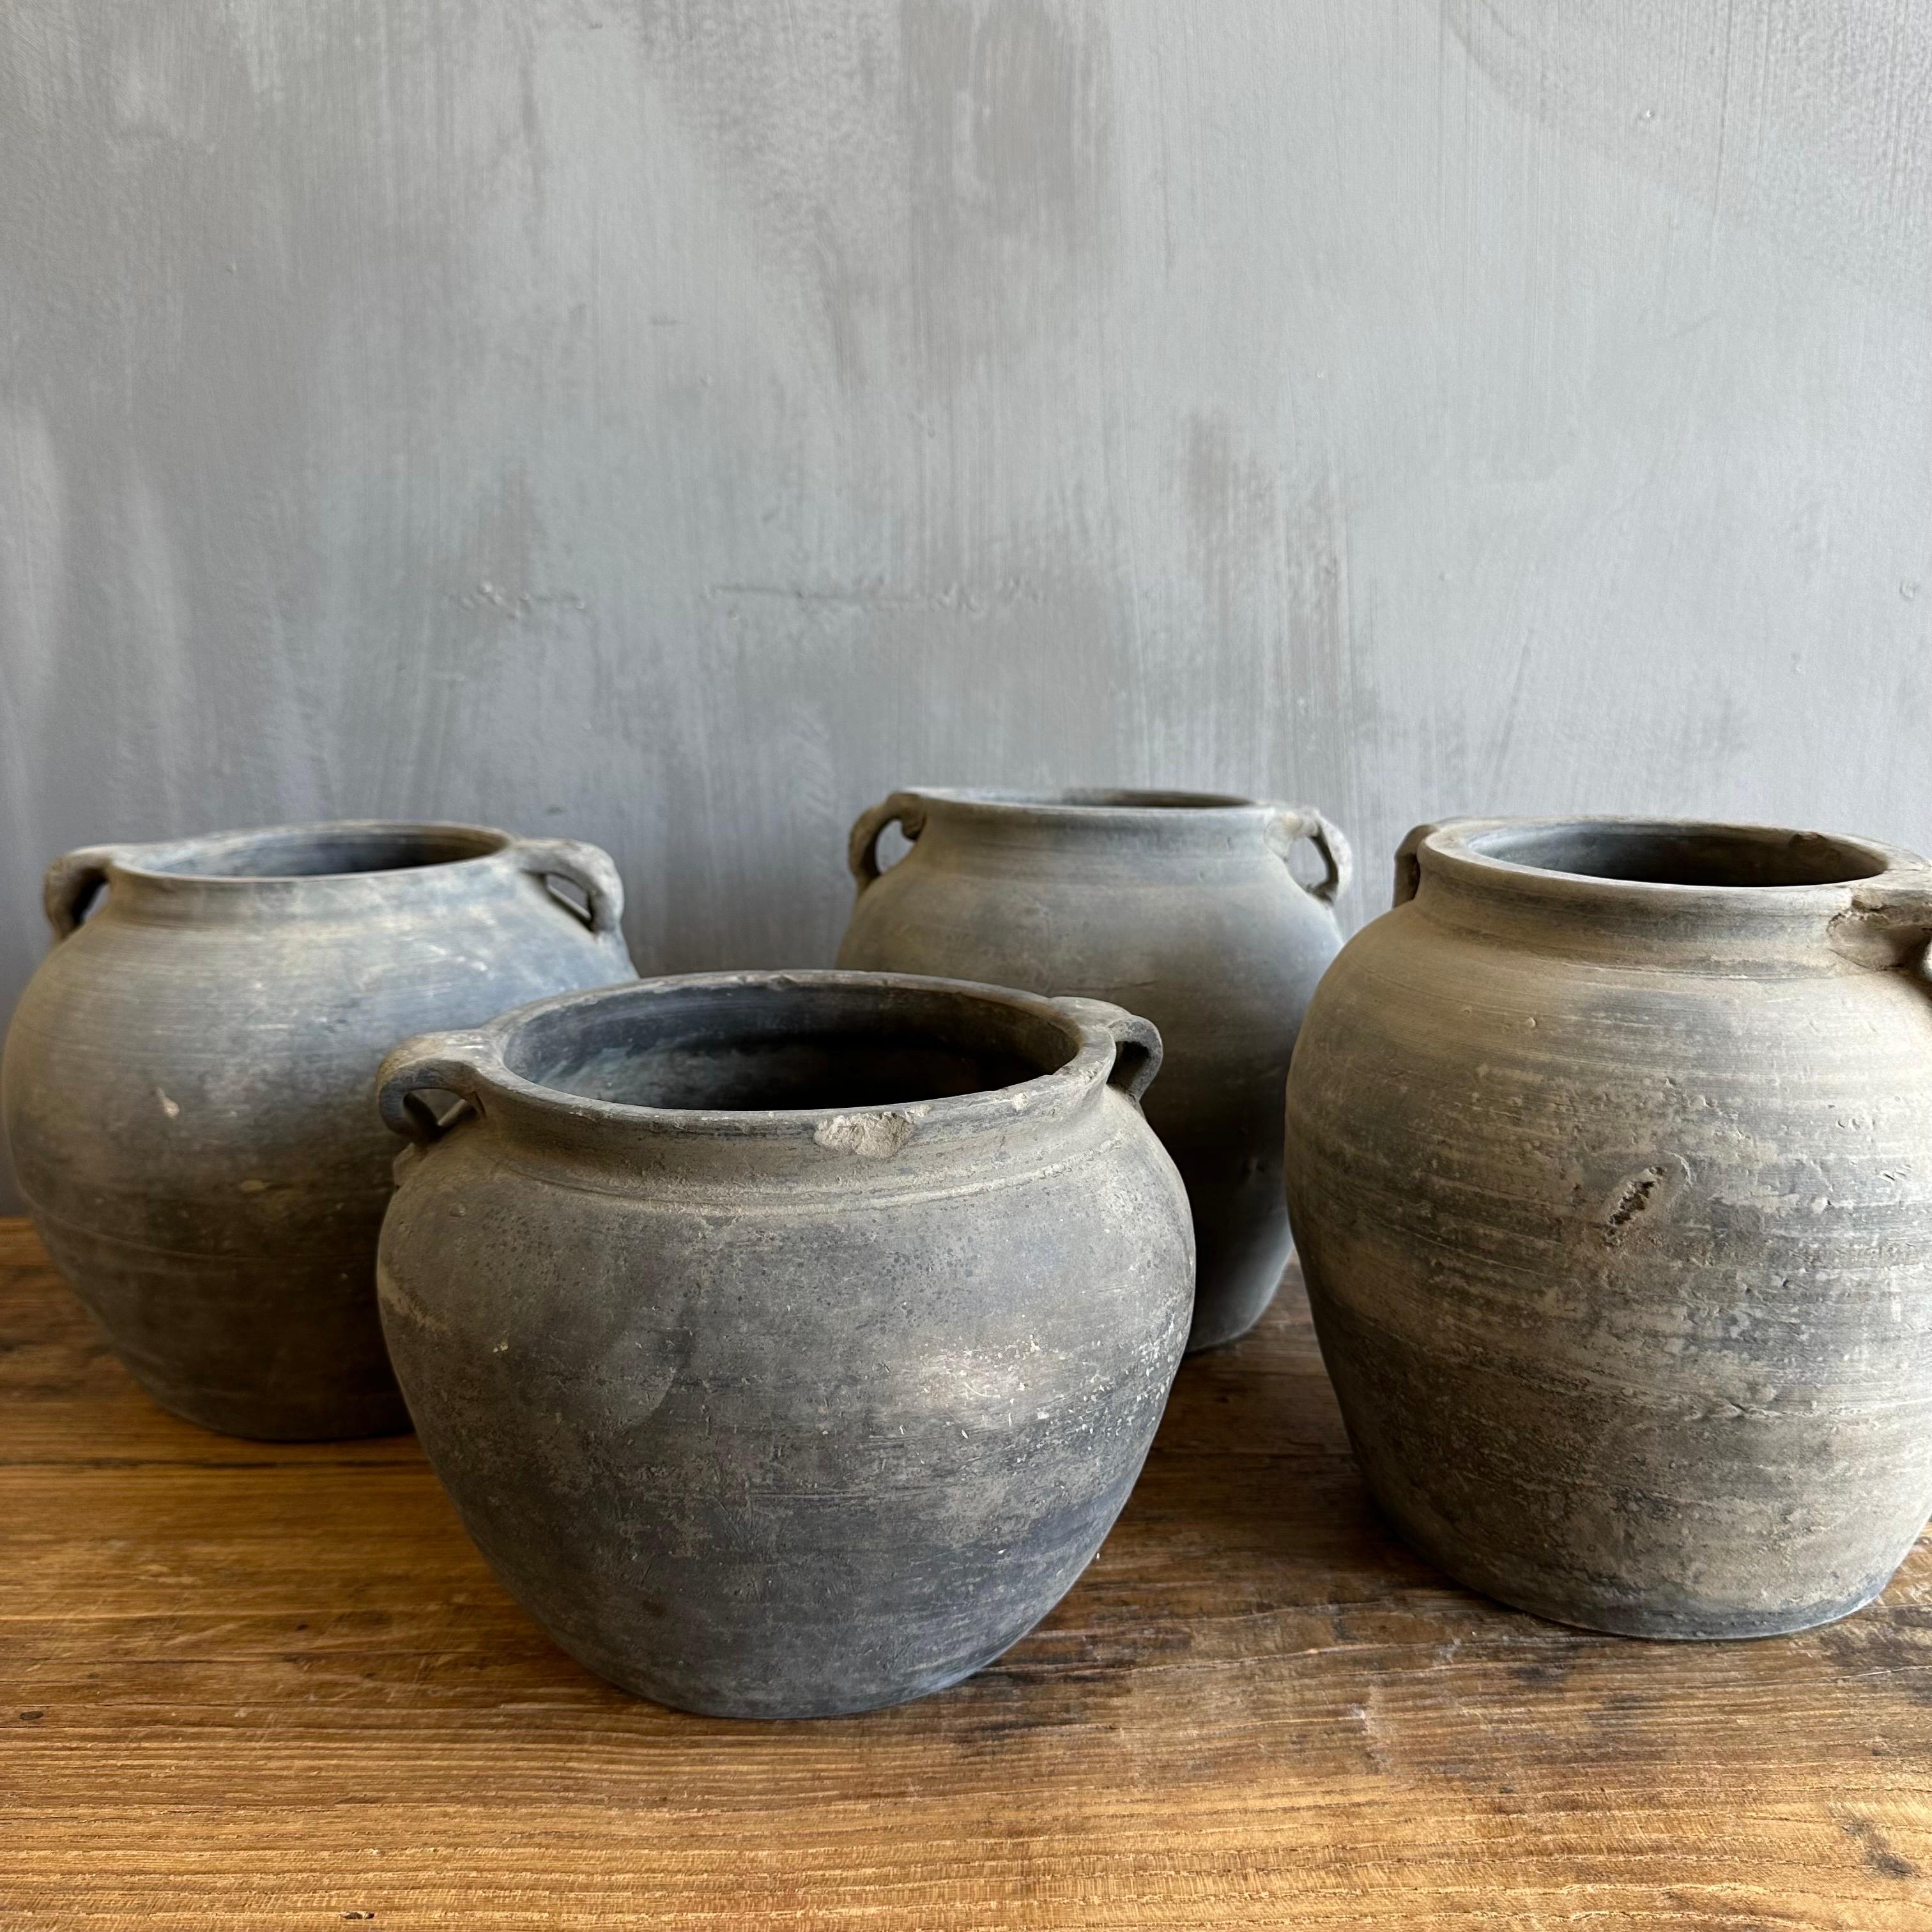 Beautiful weathered grey vintage clay pot that is beautifully colored and authentically worn. The surface of the pot and handle are peeling in places, revealing the original clay below. These qualities give the pot a lived-in appearance and will